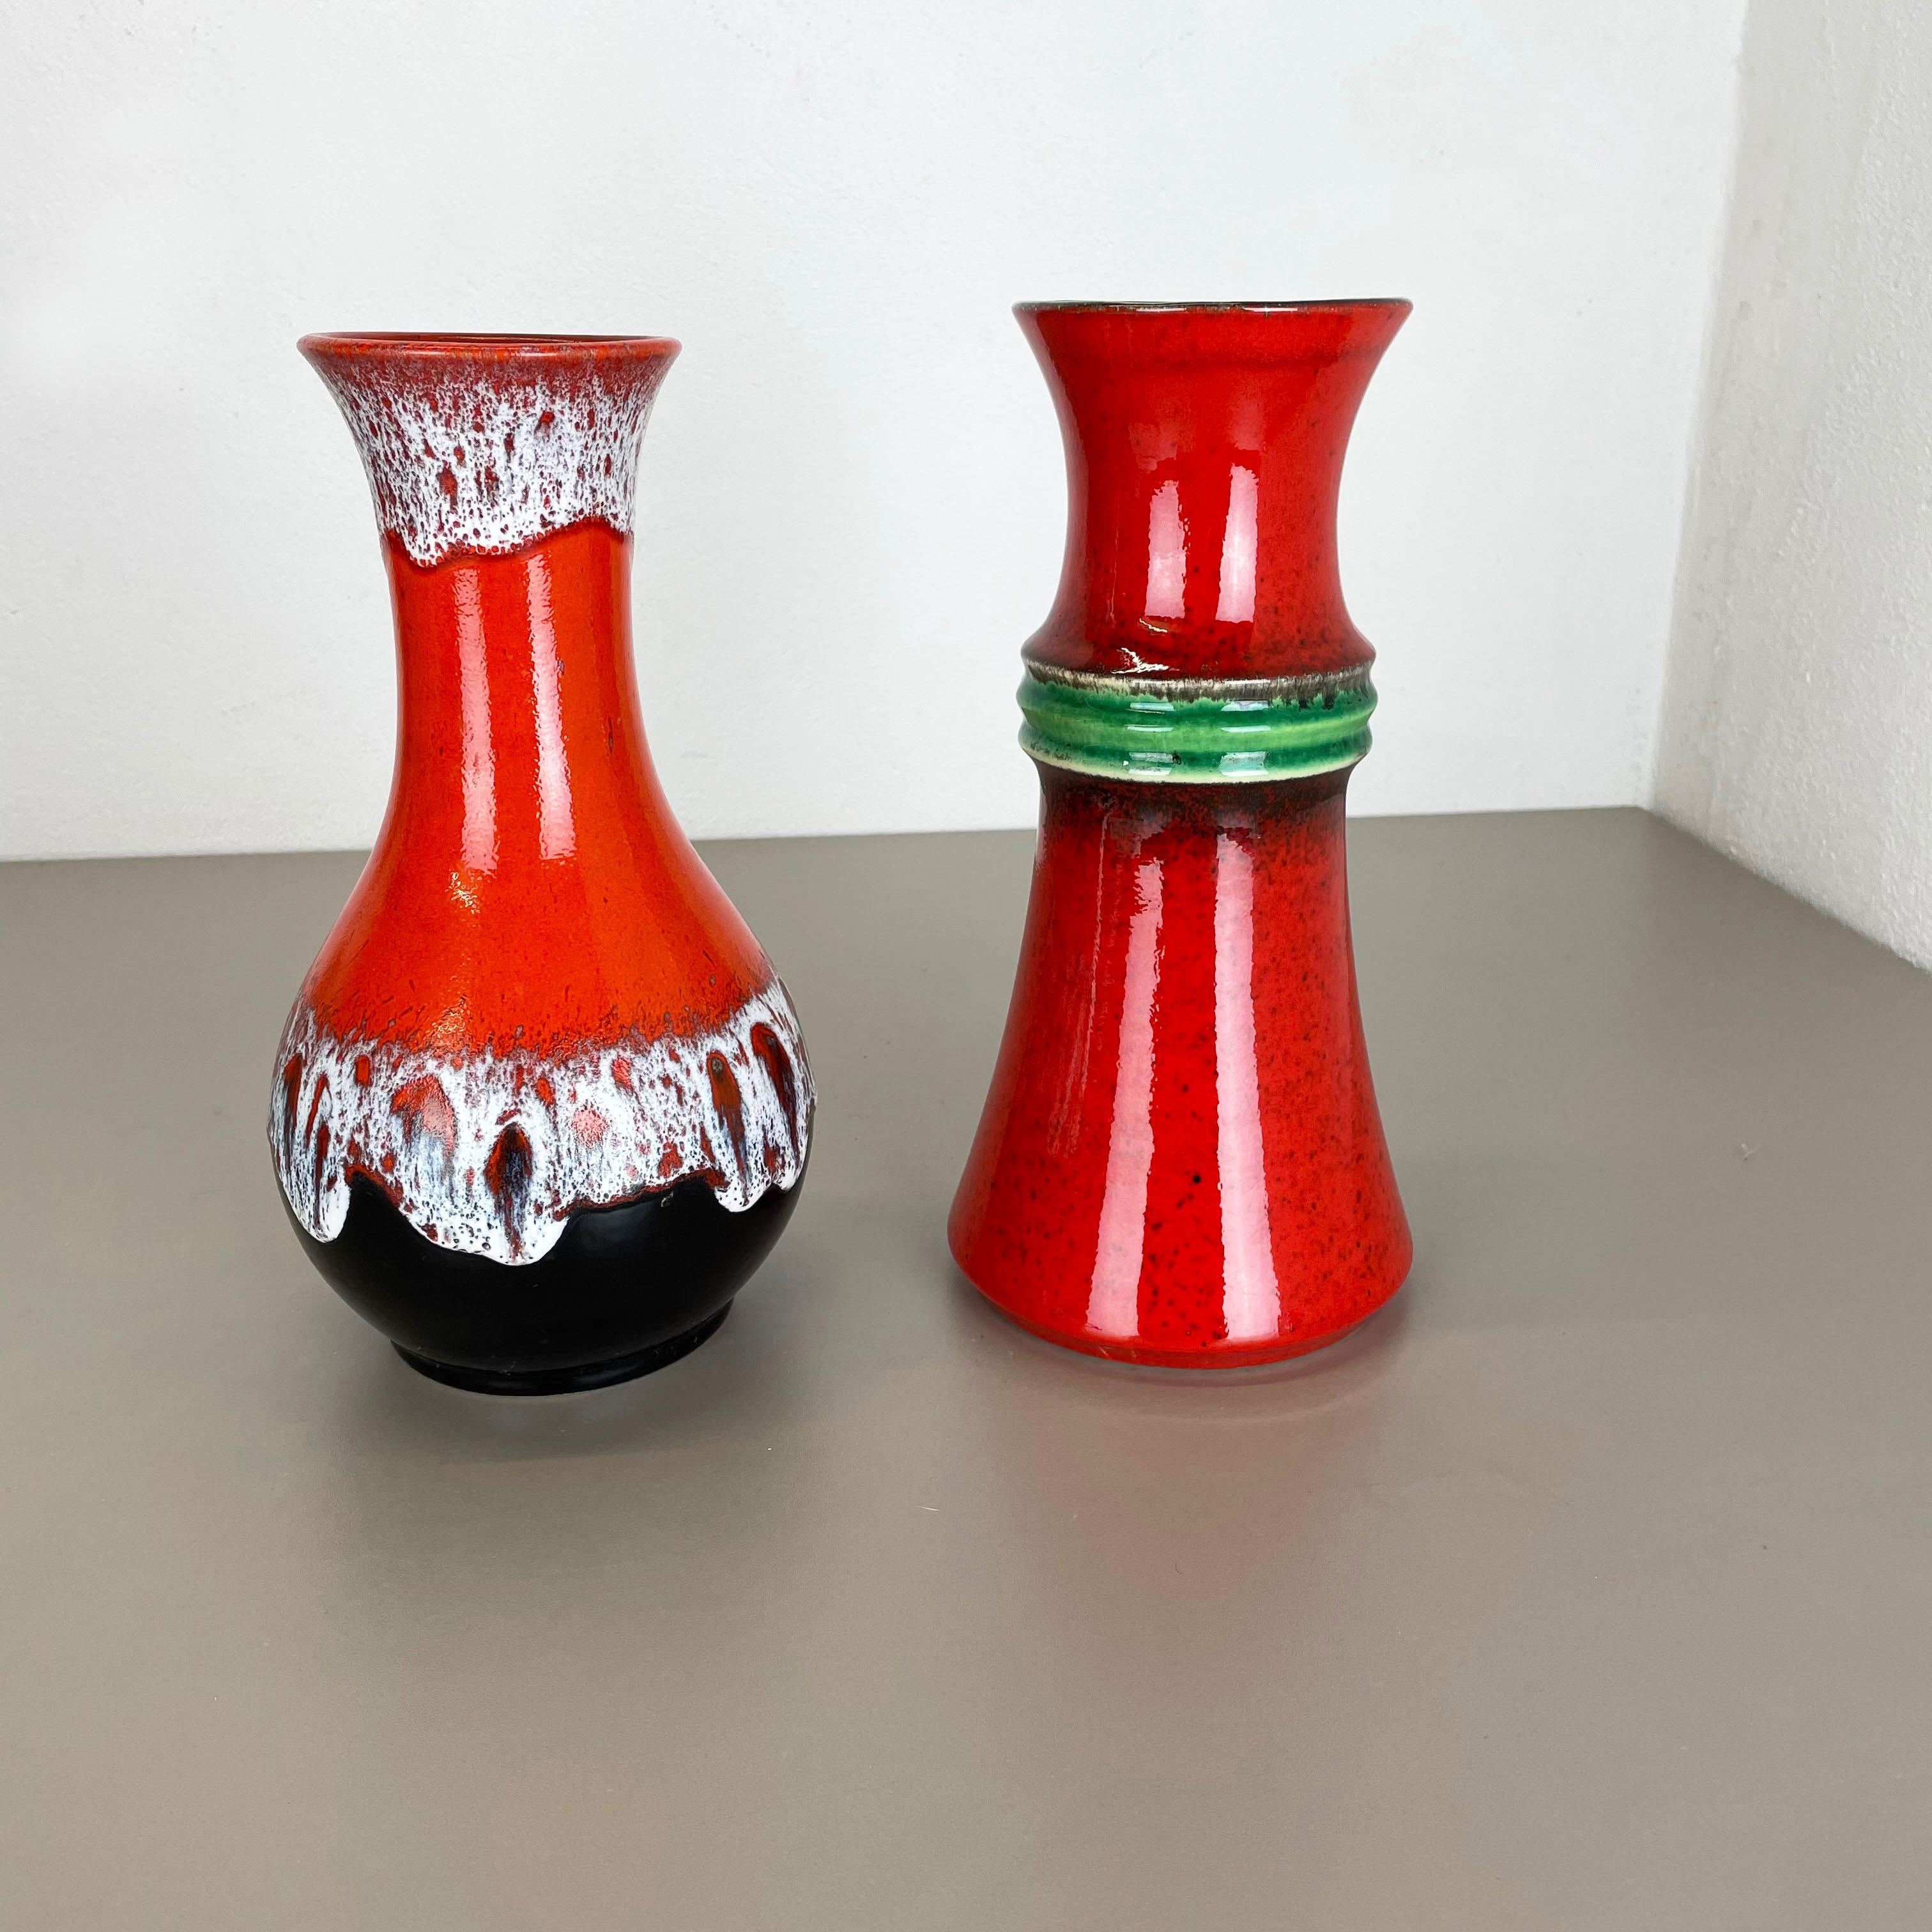 Article:

Pottery ceramic vase set of 2


Producer:

JASBA Ceramic, Germany


Decade:

1970s



Description:

Set of 2 original vintage 1970s pottery ceramic vase made in Germany. High quality German production with a nice abstract